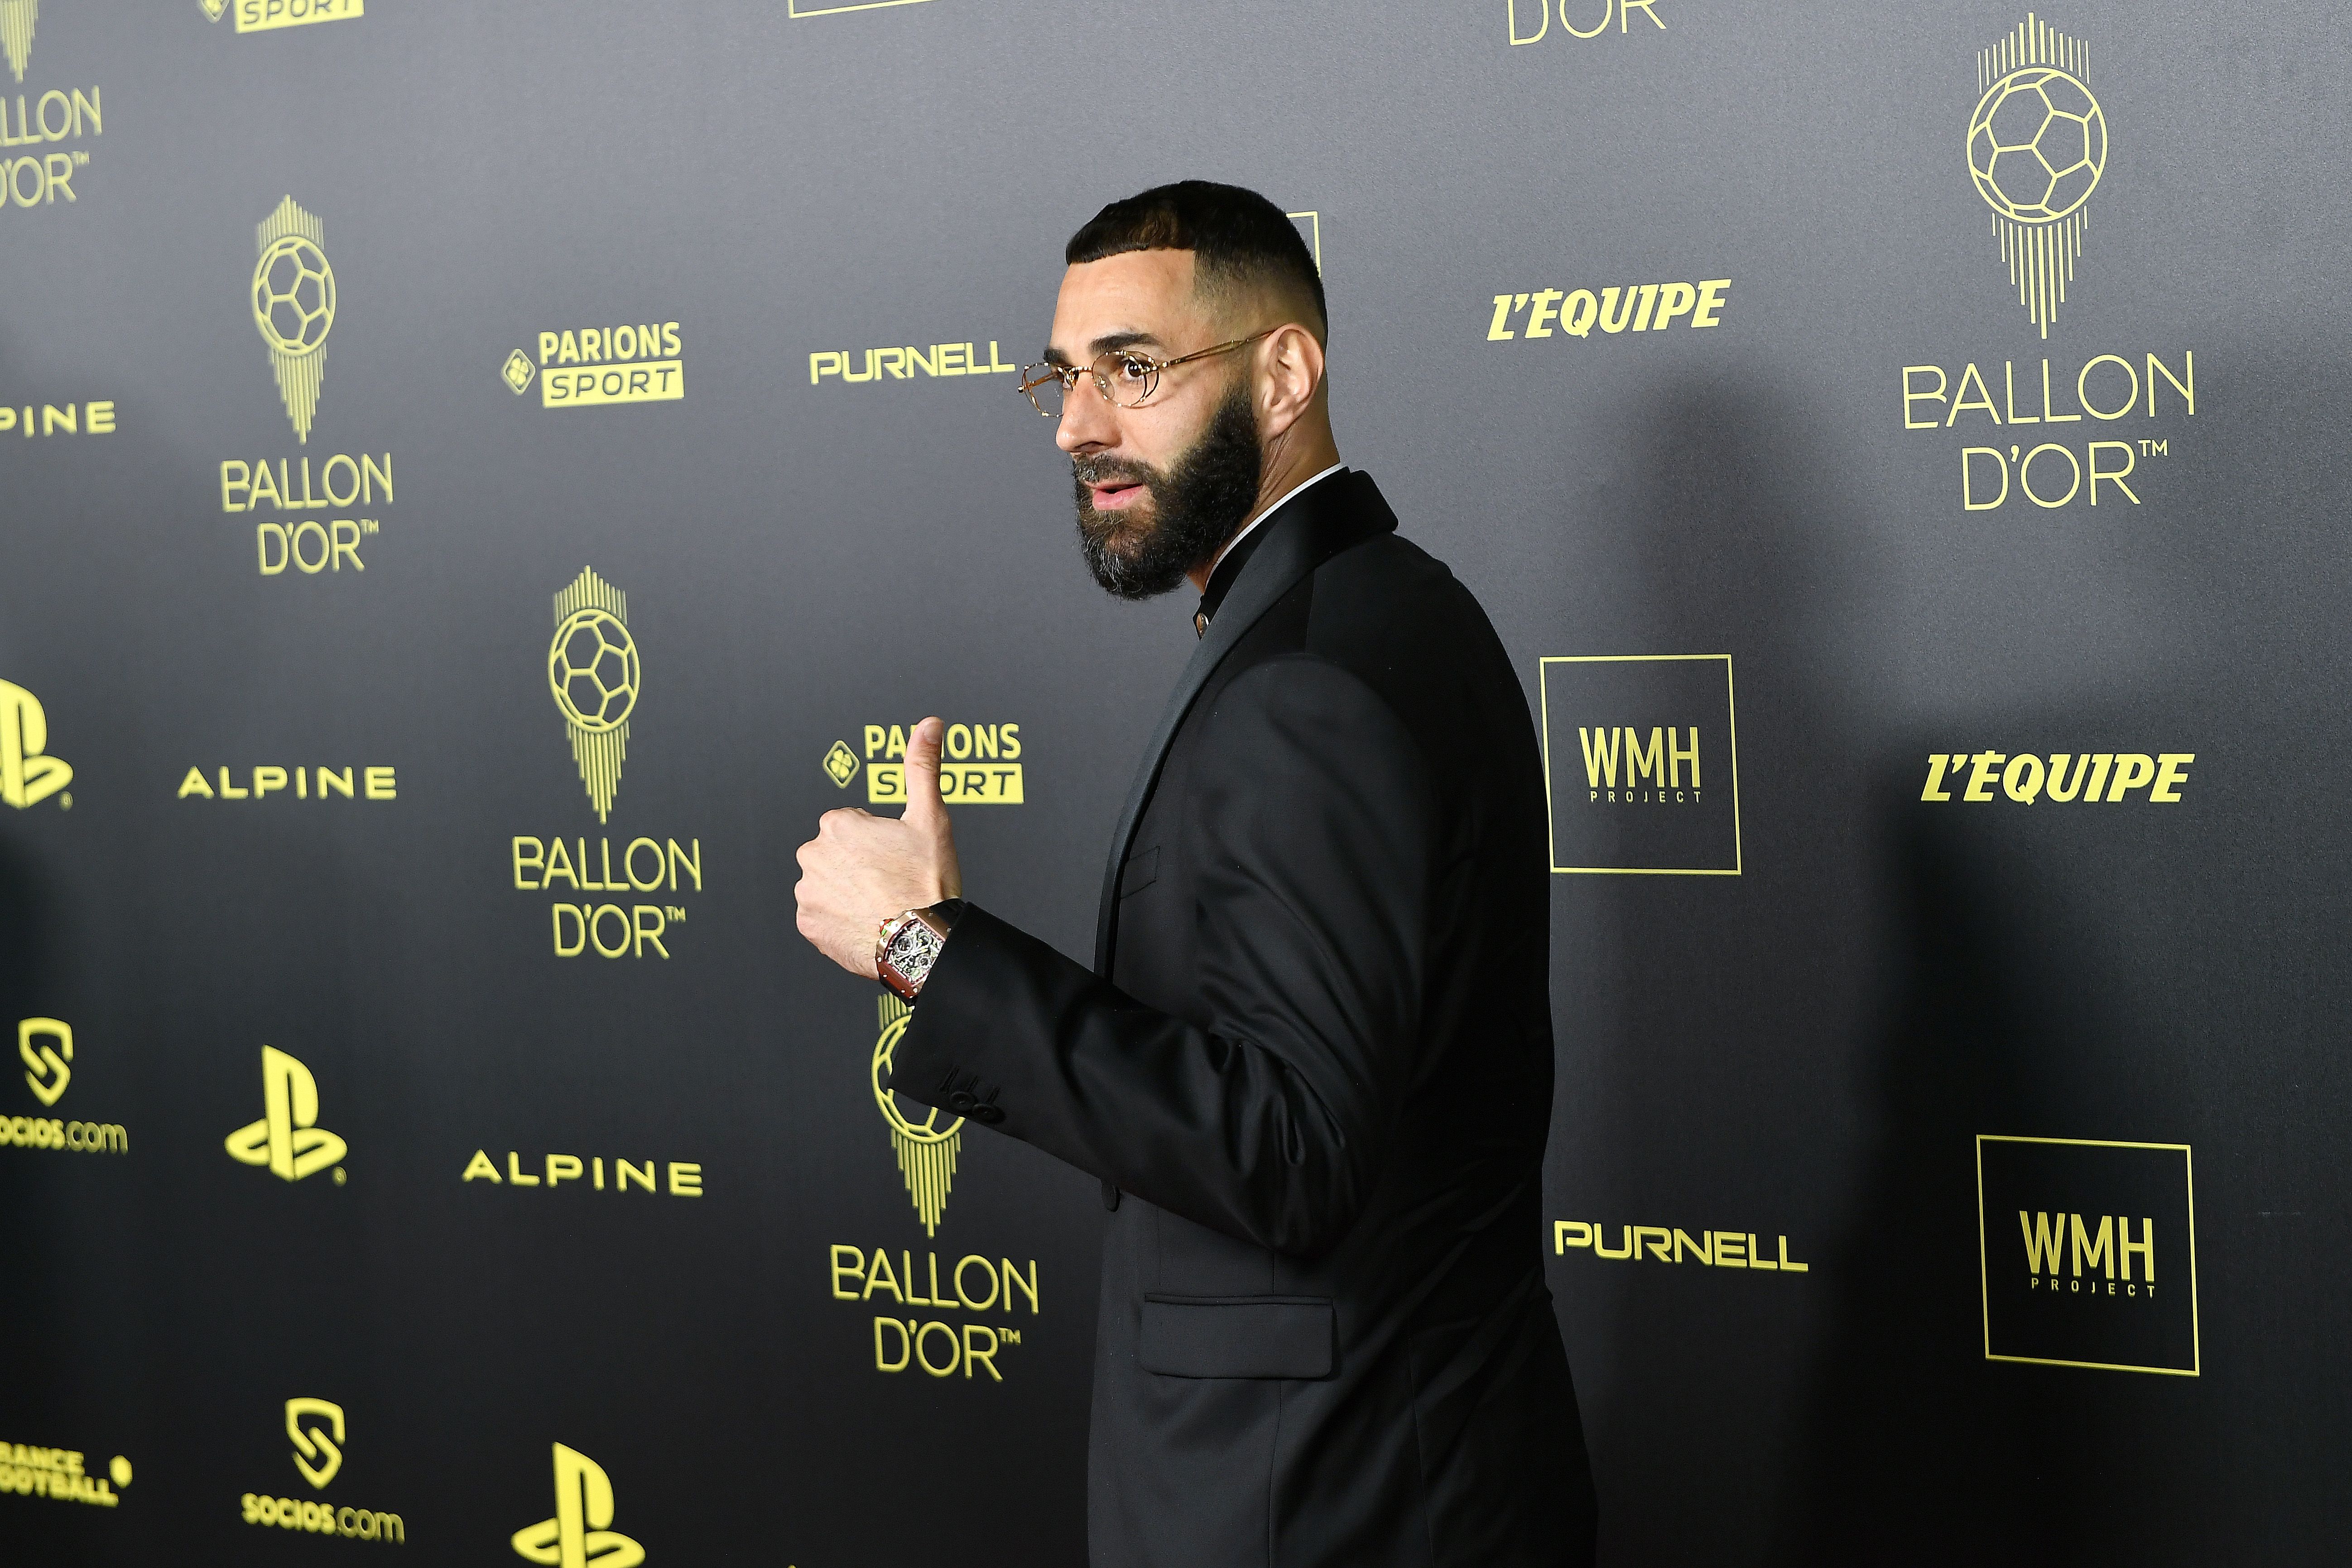 Karim Benzema and his expensive watch at the Ballon d'Or ceremony